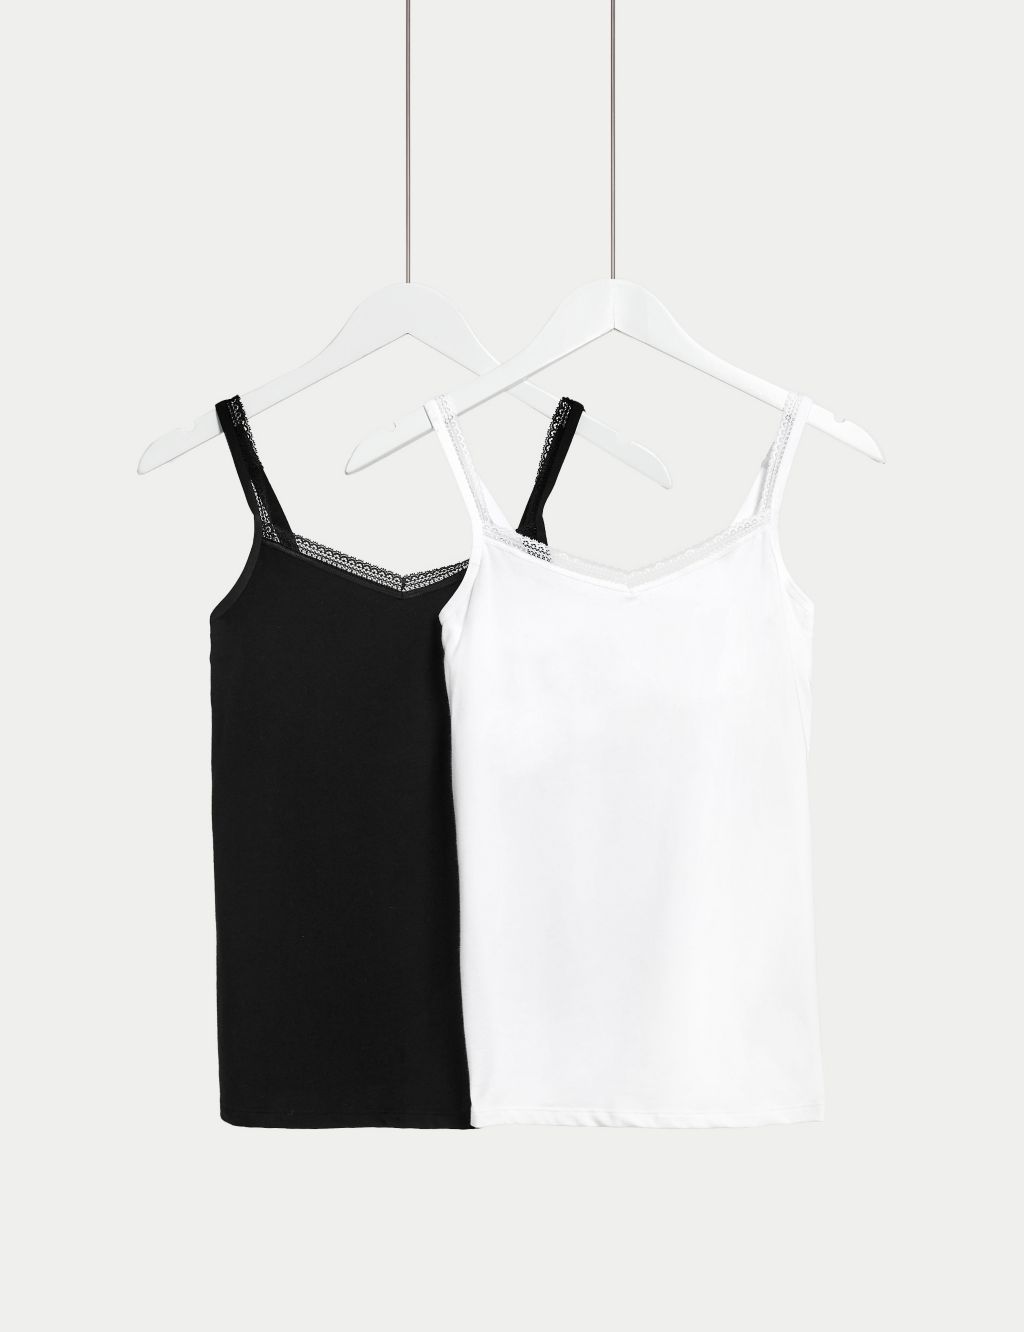 Pack of 2 Les Pockets Coton camisoles in black and white